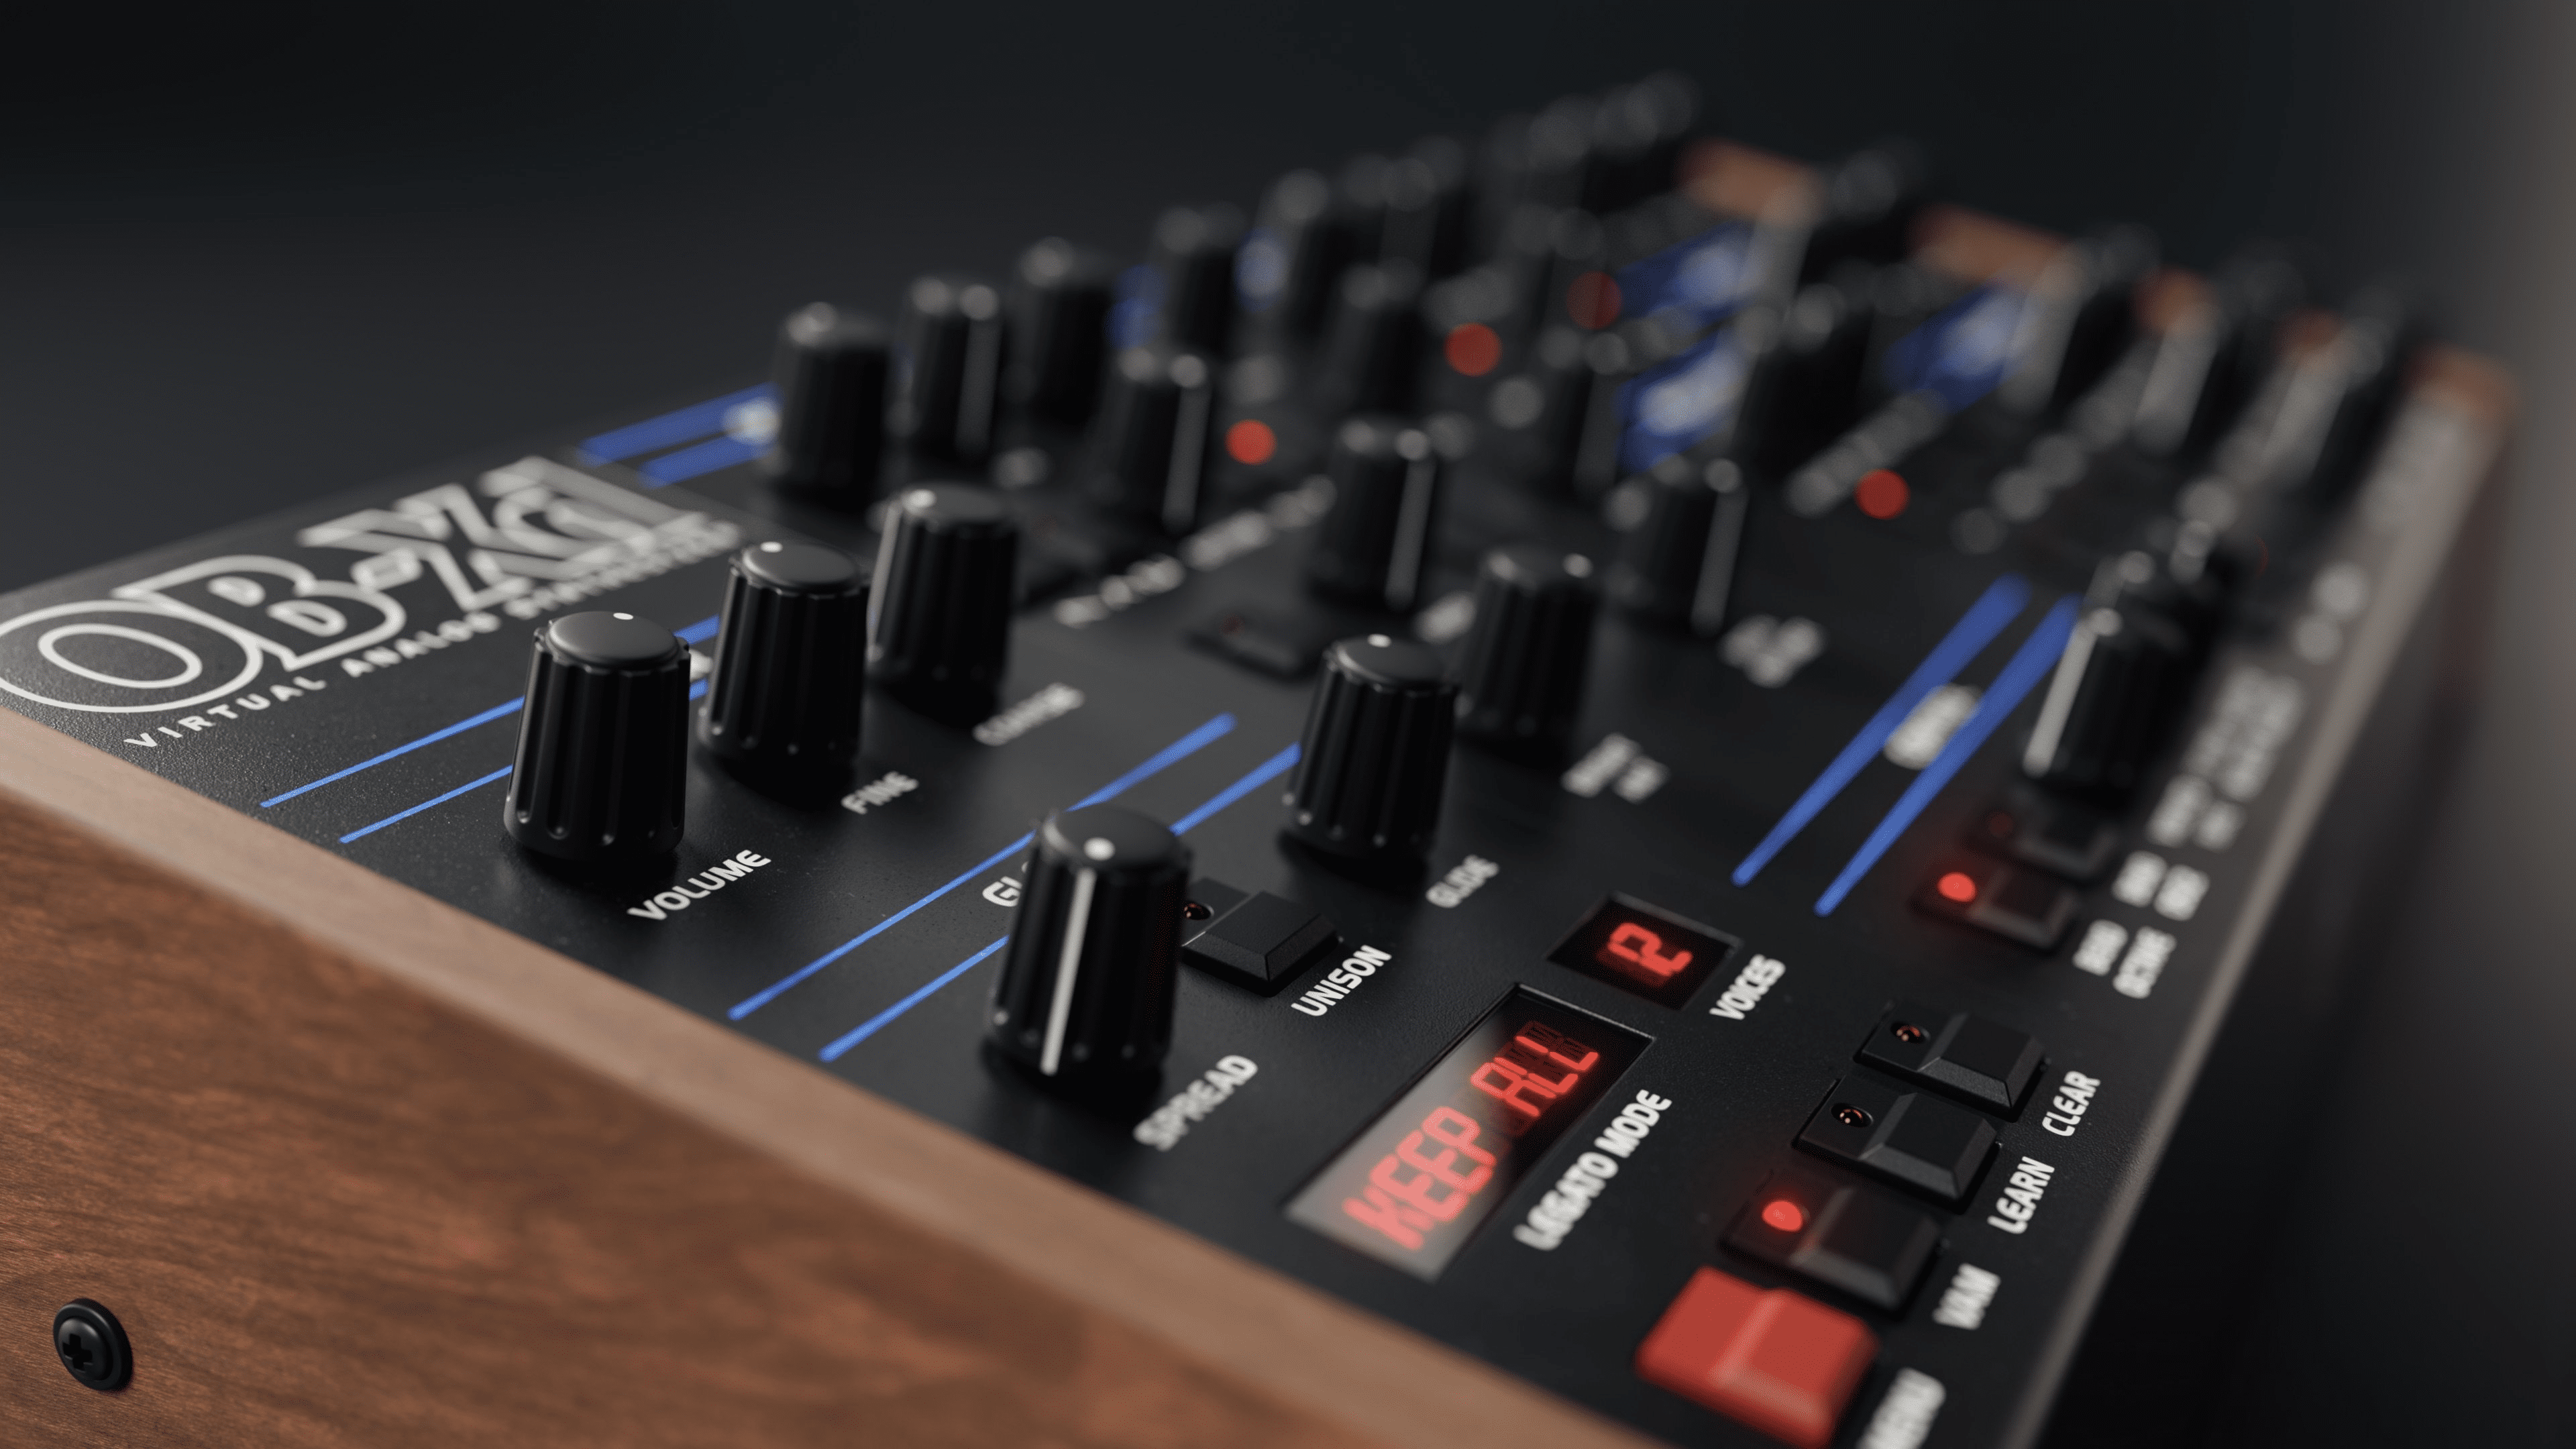 discoDSP's Released OB-Xd Oberheim Based Synth 2.0